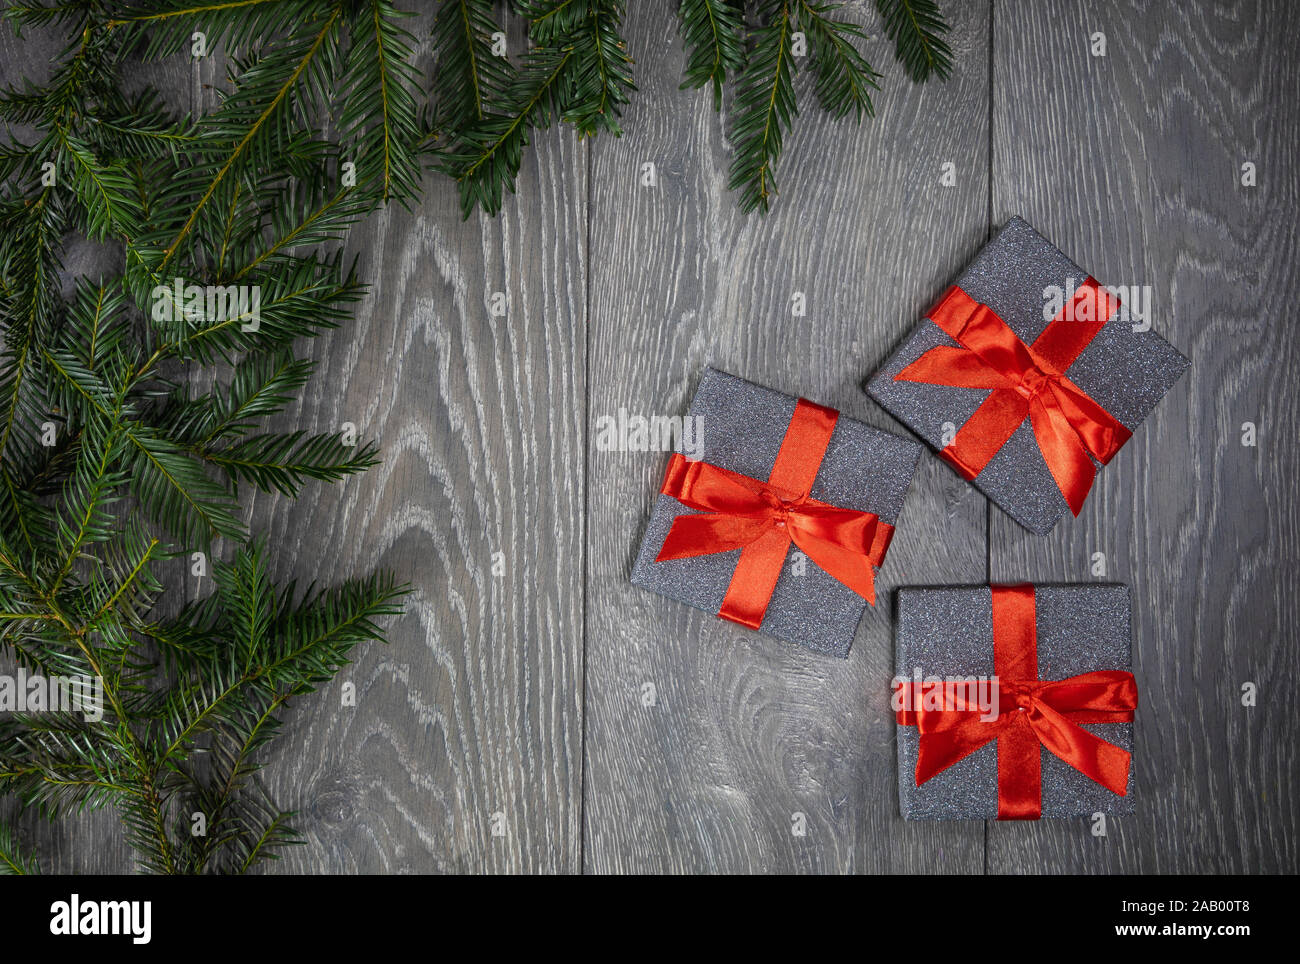 Three Christmas gifts boxes on a grey wooden floor background and the branch's of a Christmas tree bordering the left frame of photograph Stock Photo